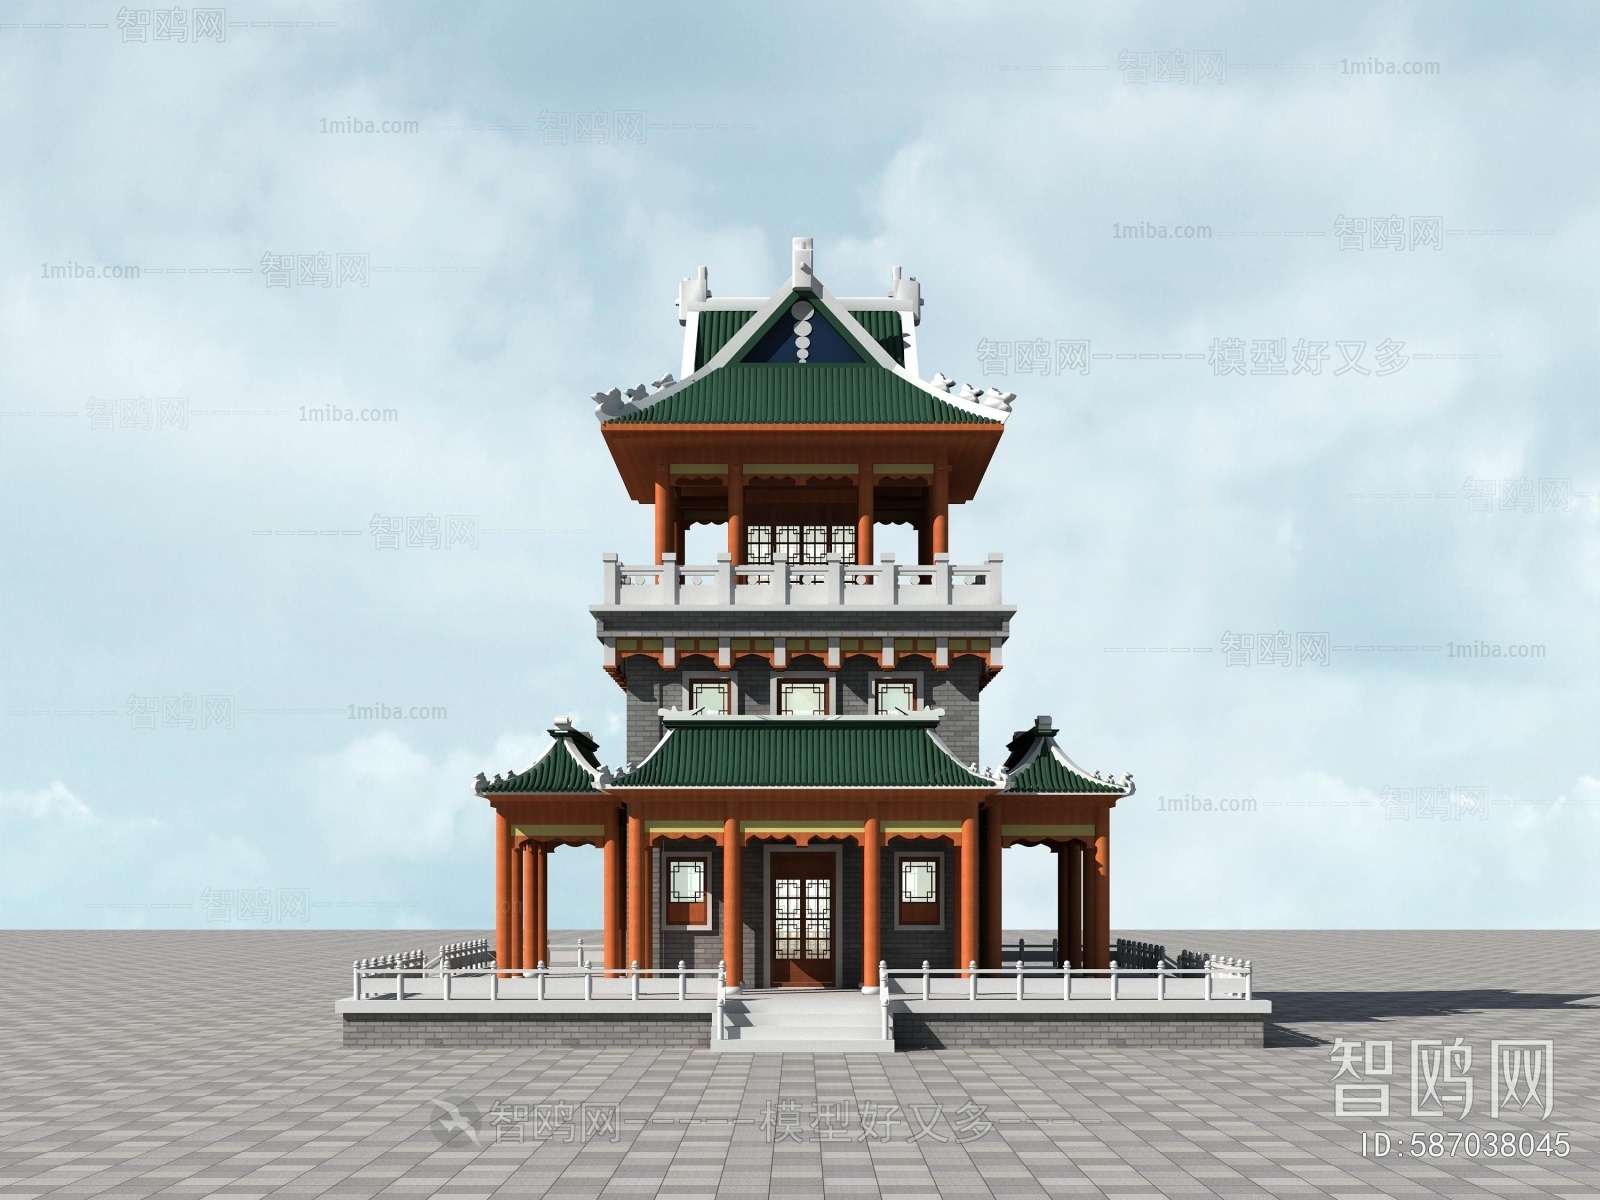 Chinese Style Tower